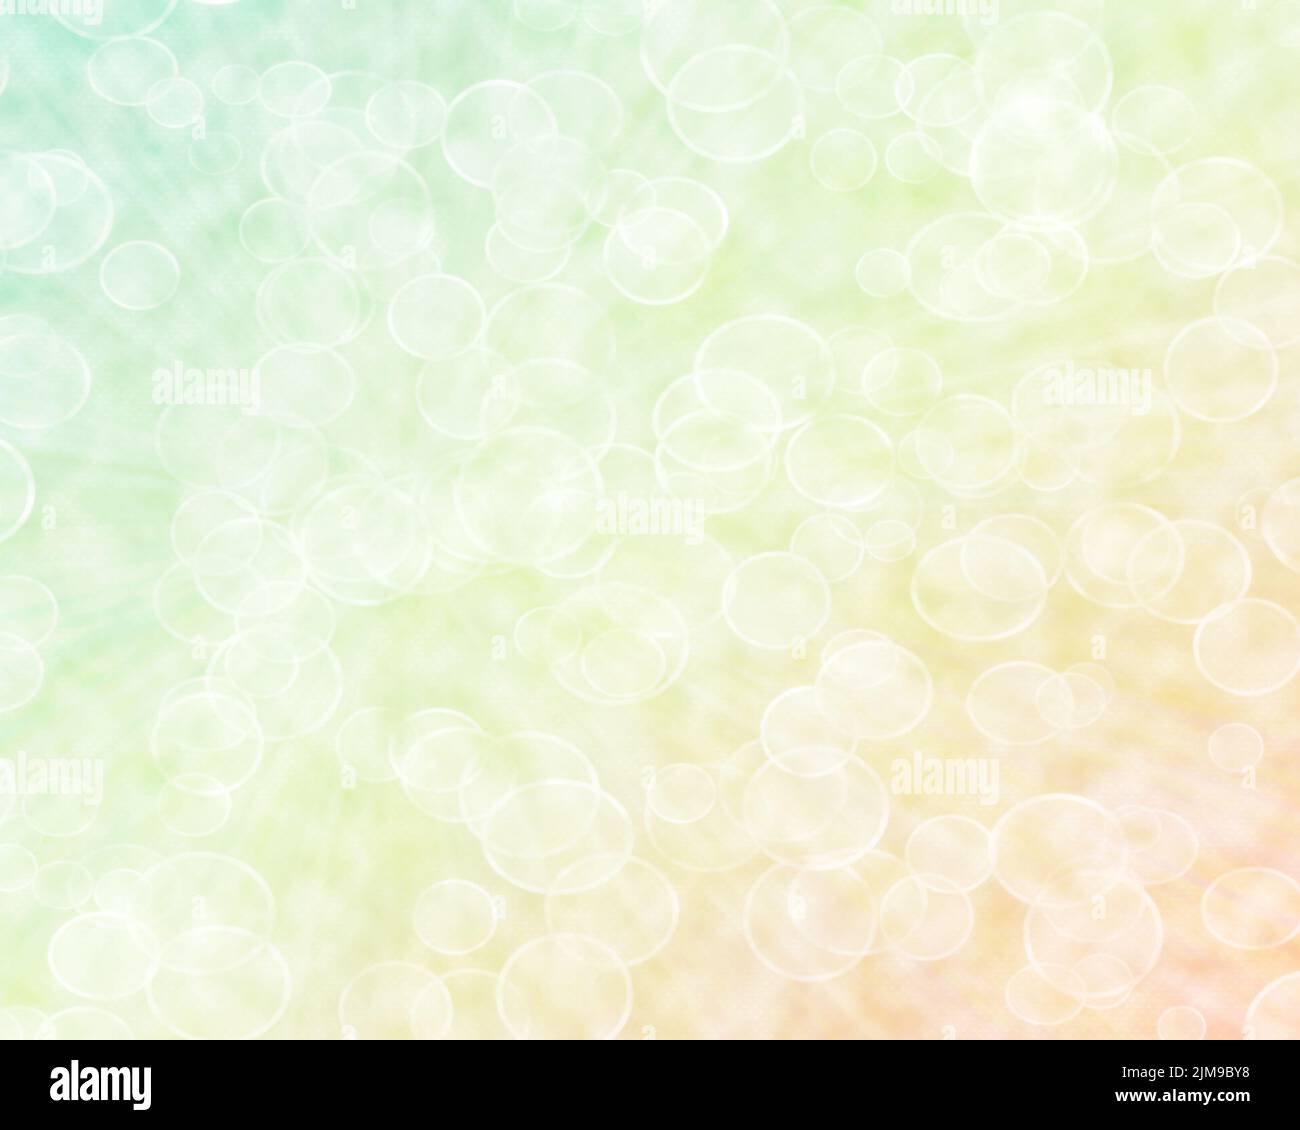 Abstract Boken Background in Light Yellow, Orange and Green Shades. Stock Photo